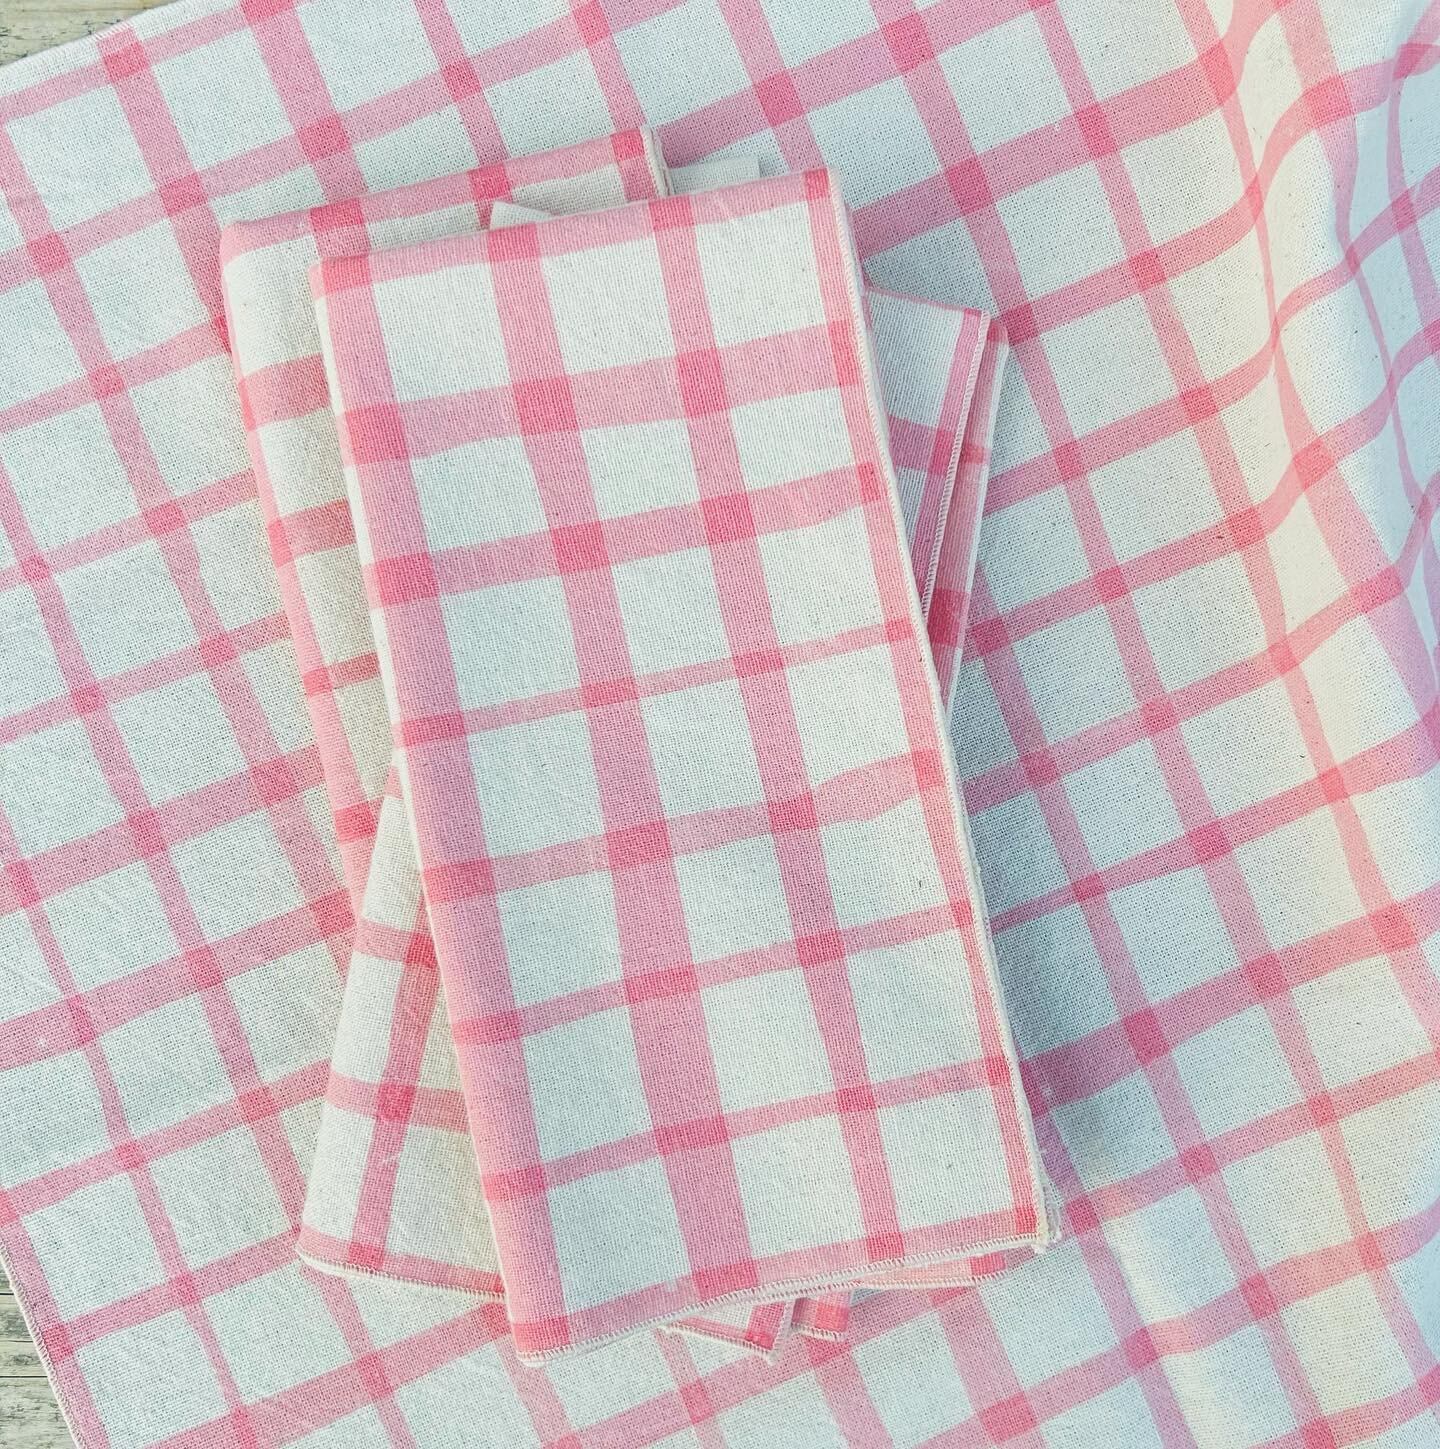 by request! hatch napkins in pink. 
available Saturday at the White Hart in Salisbury CT or at megmusgrove.com